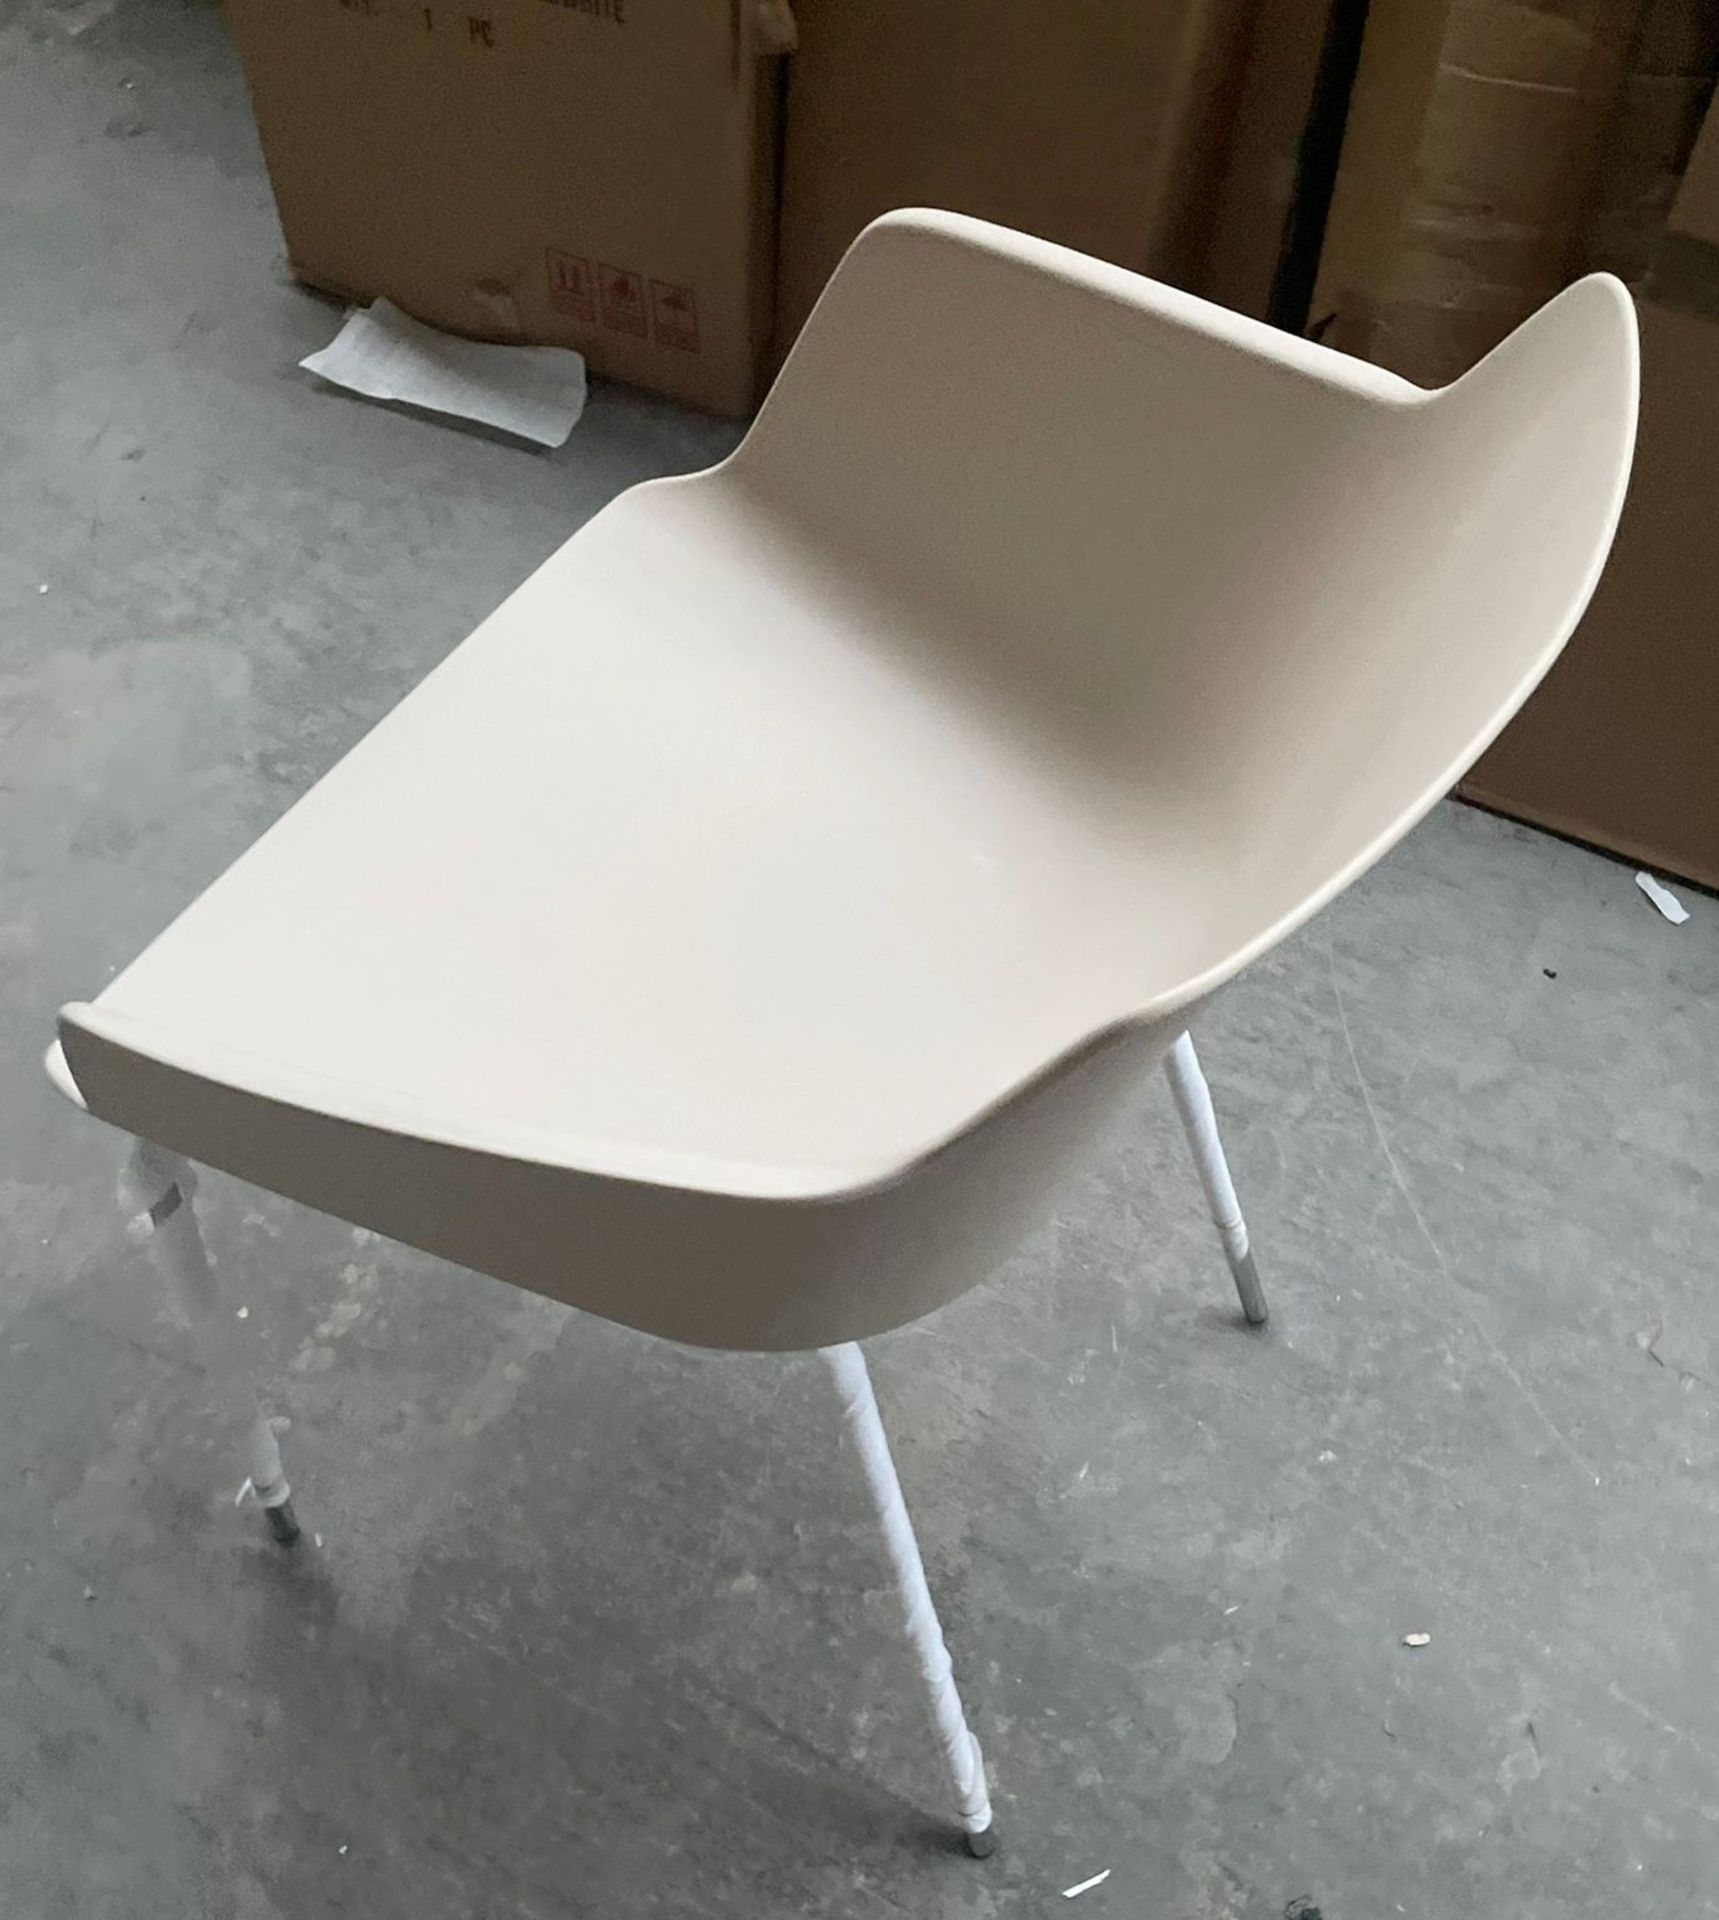 1 x Lullaby Ooland Light Brown Chair With Chrome Base - Dimensions: 57(h) x 52(w) x 52(d) cm - Brand - Image 4 of 5